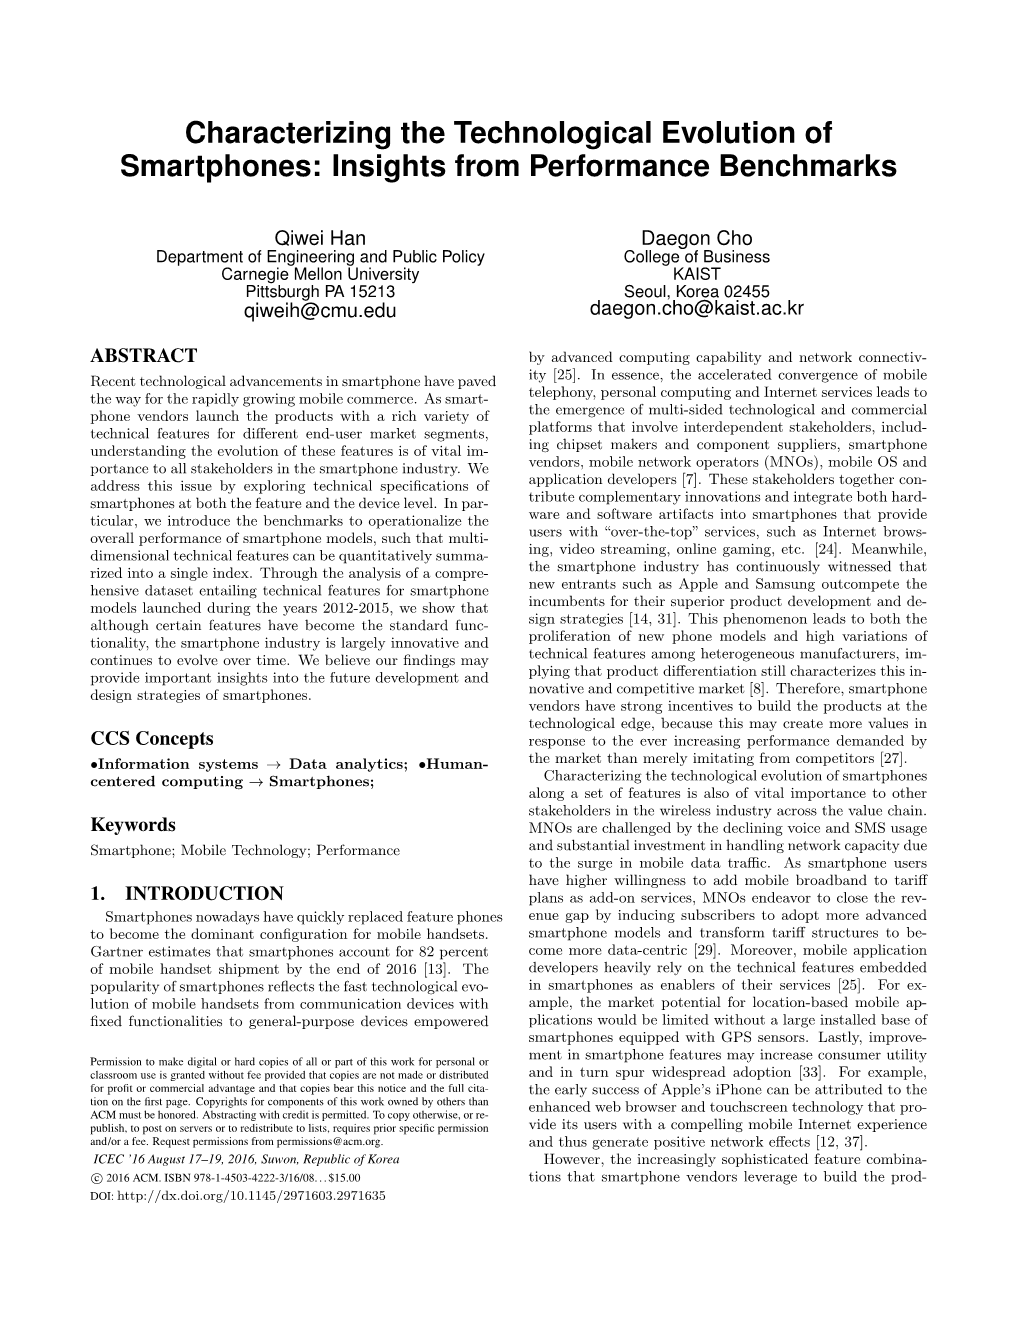 Characterizing the Technological Evolution of Smartphones: Insights from Performance Benchmarks